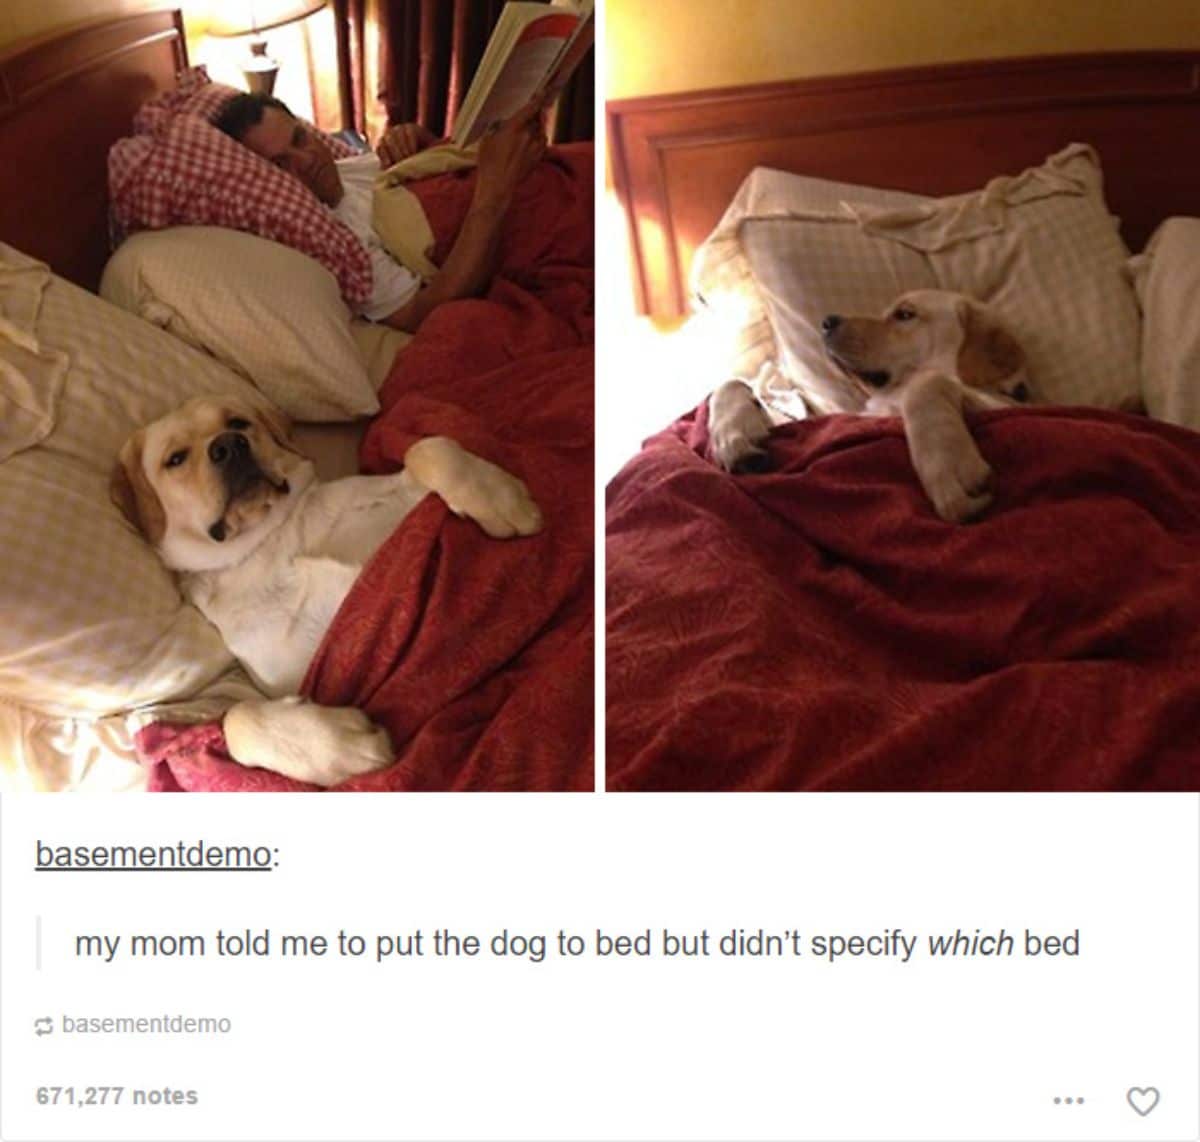 2 photos of a yellow labrador retriever in a bed under a red blanket next to a man